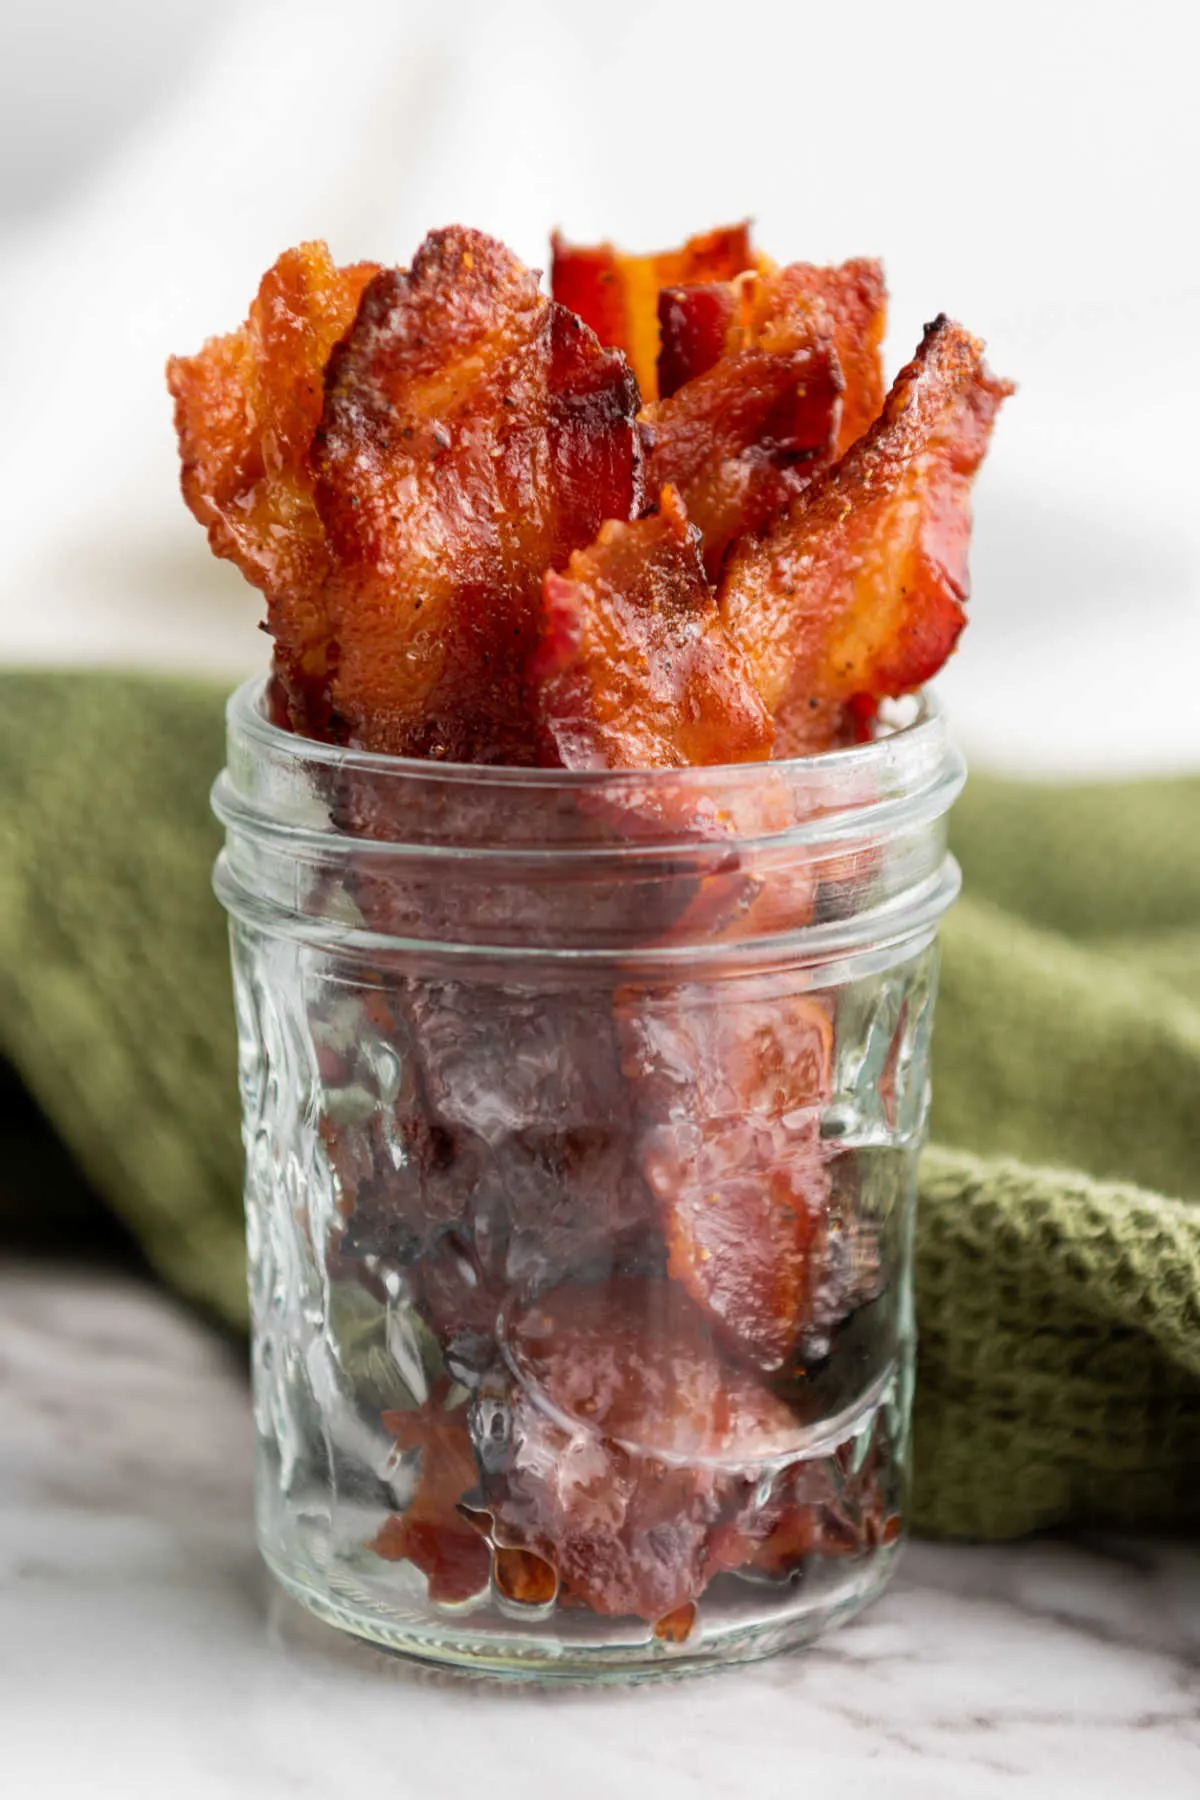 Jar with strips of maple brown sugar bacon inside showing crispy bacon with a bit of a shiny glaze.